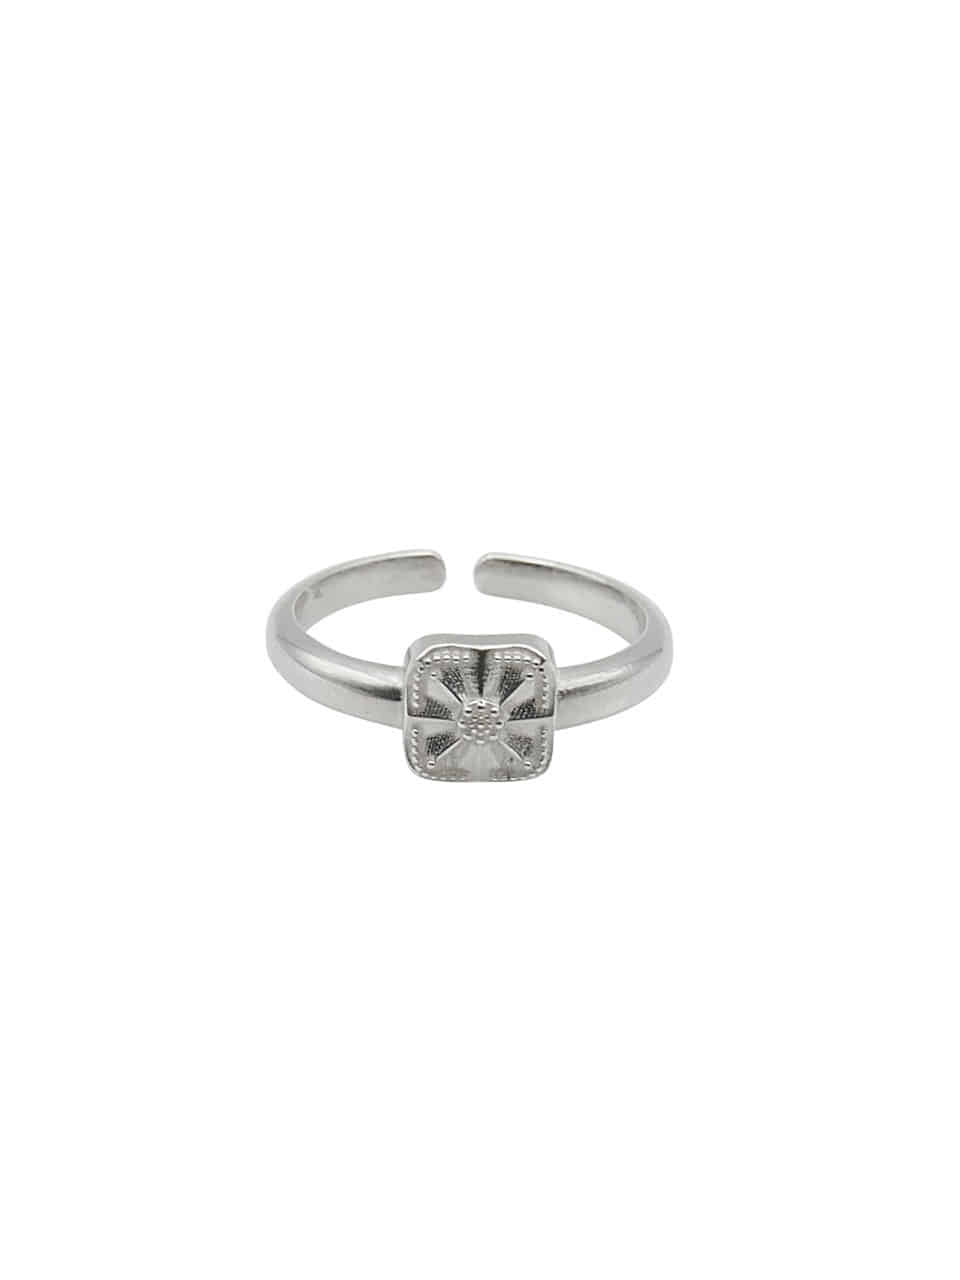 NFF - SILVER 925 SWIRL RING (SILVER)